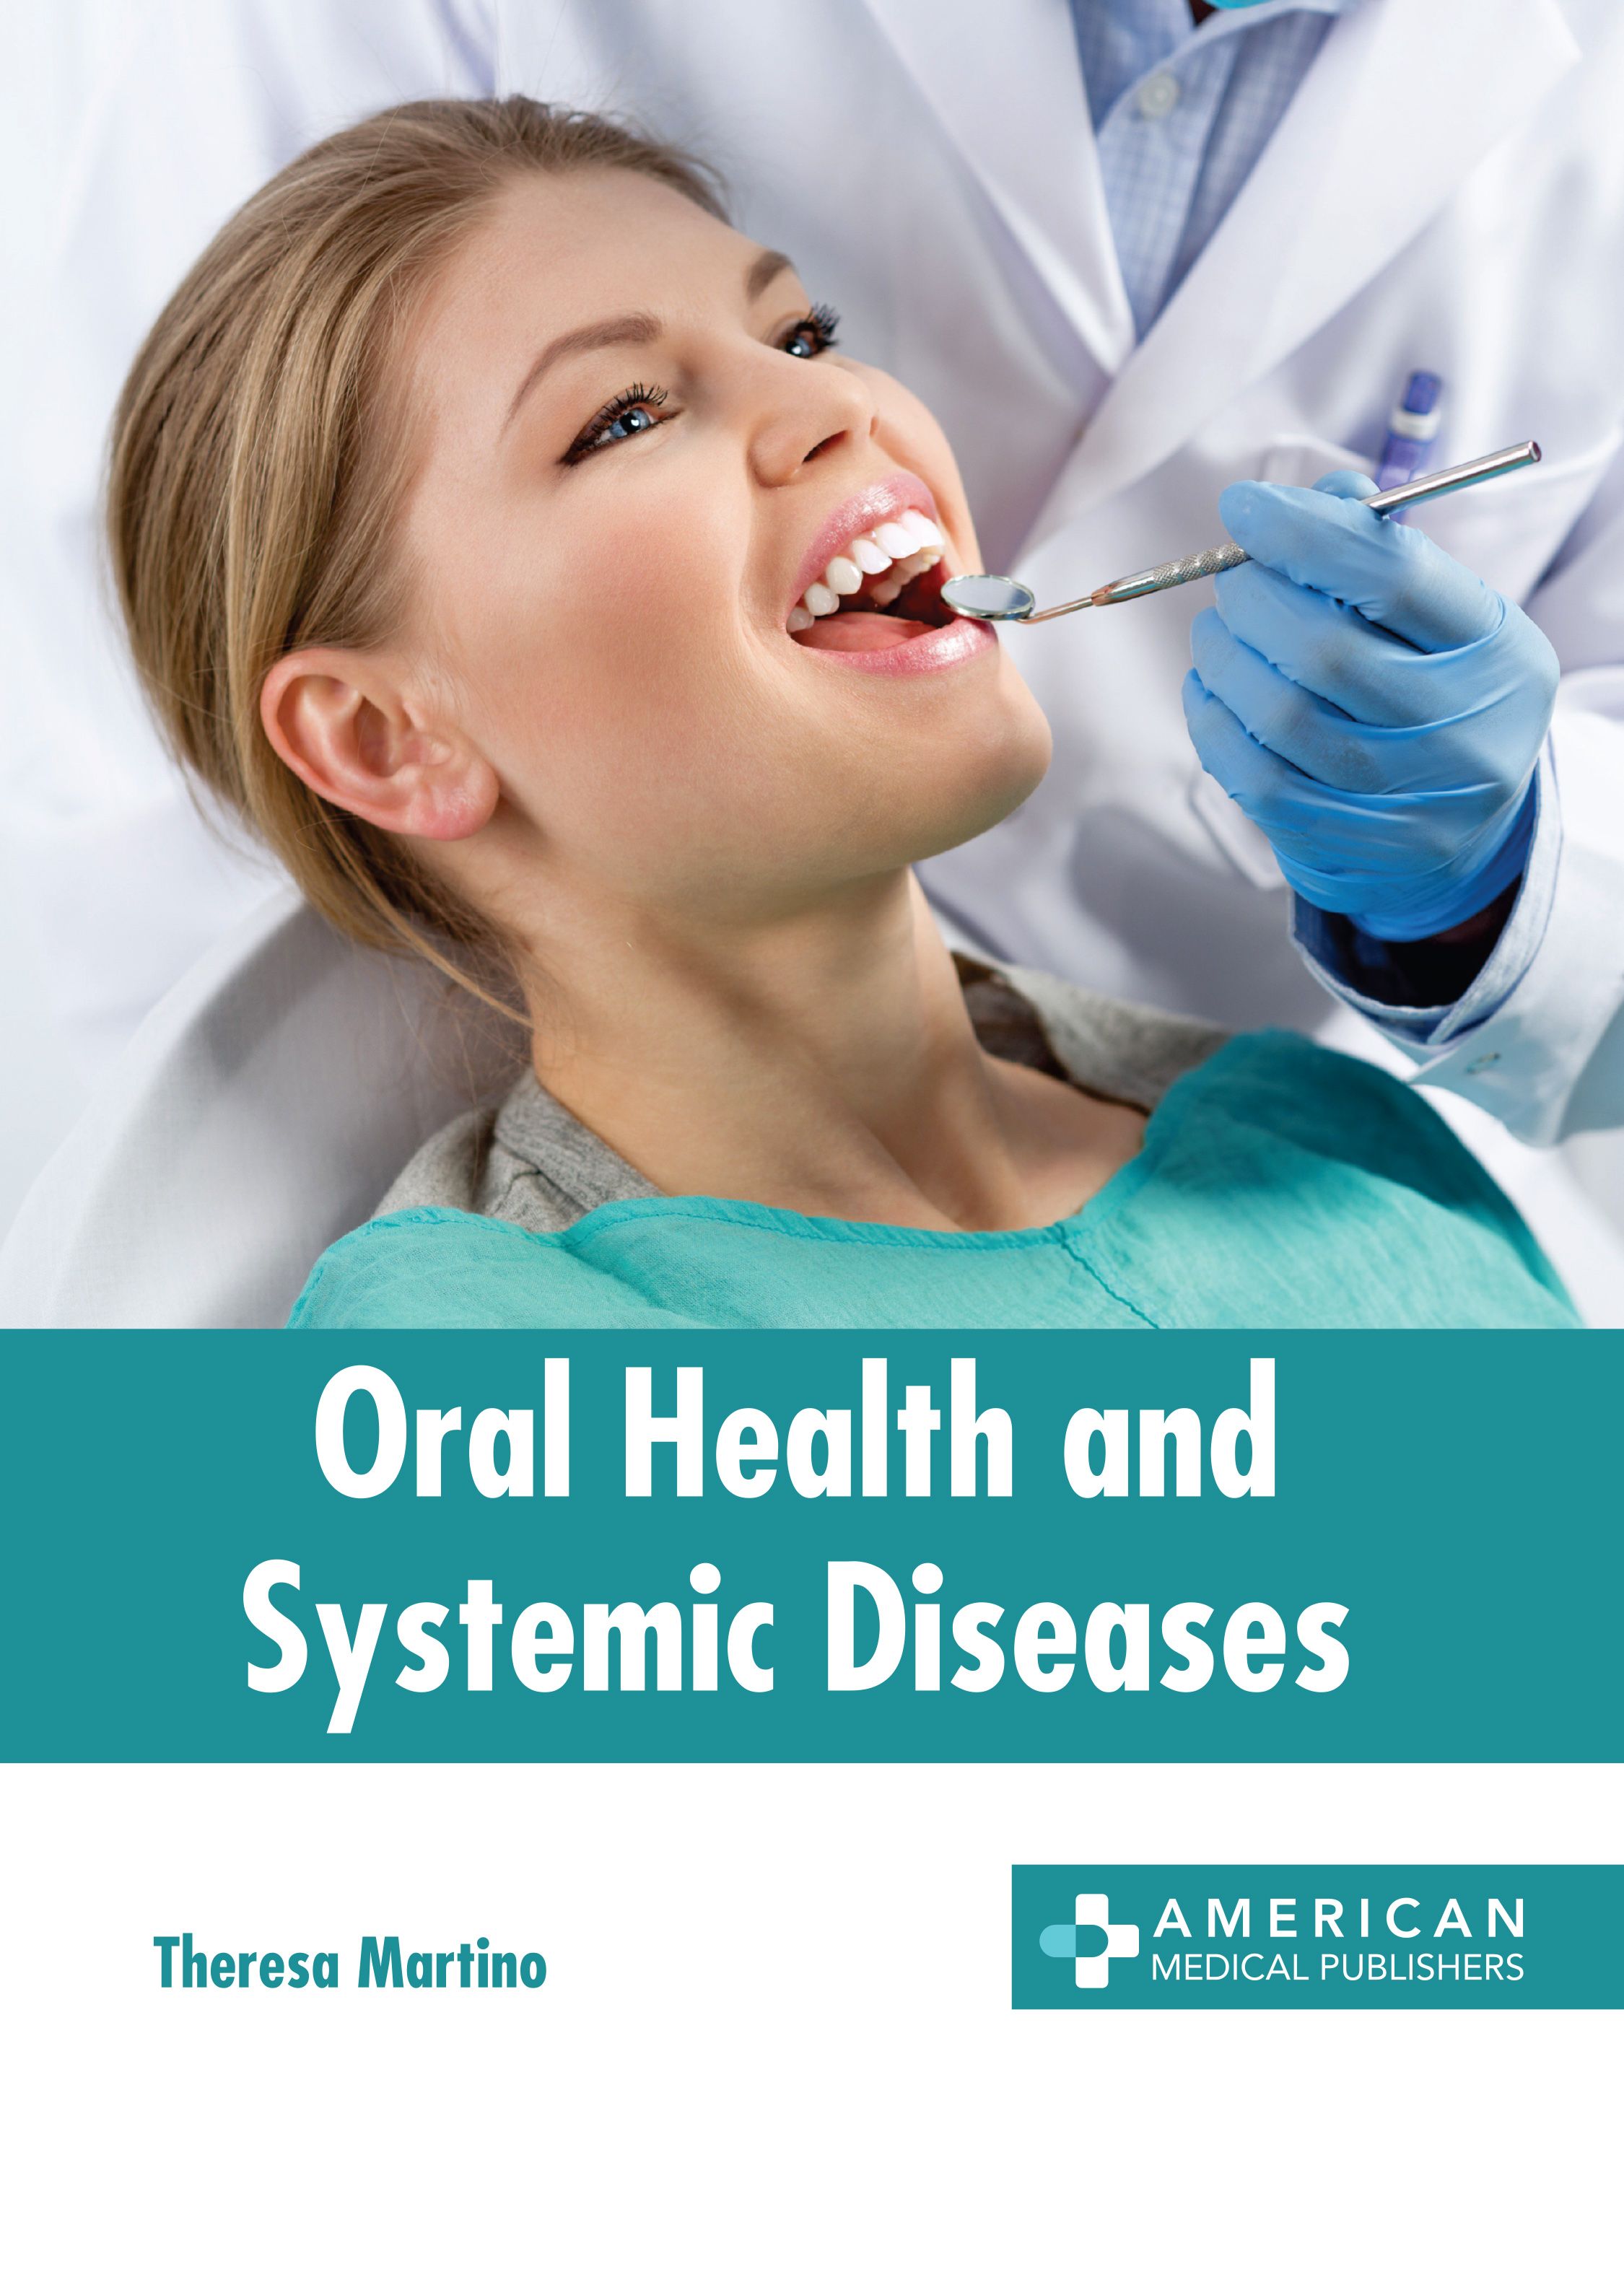 ORAL HEALTH AND SYSTEMIC DISEASES